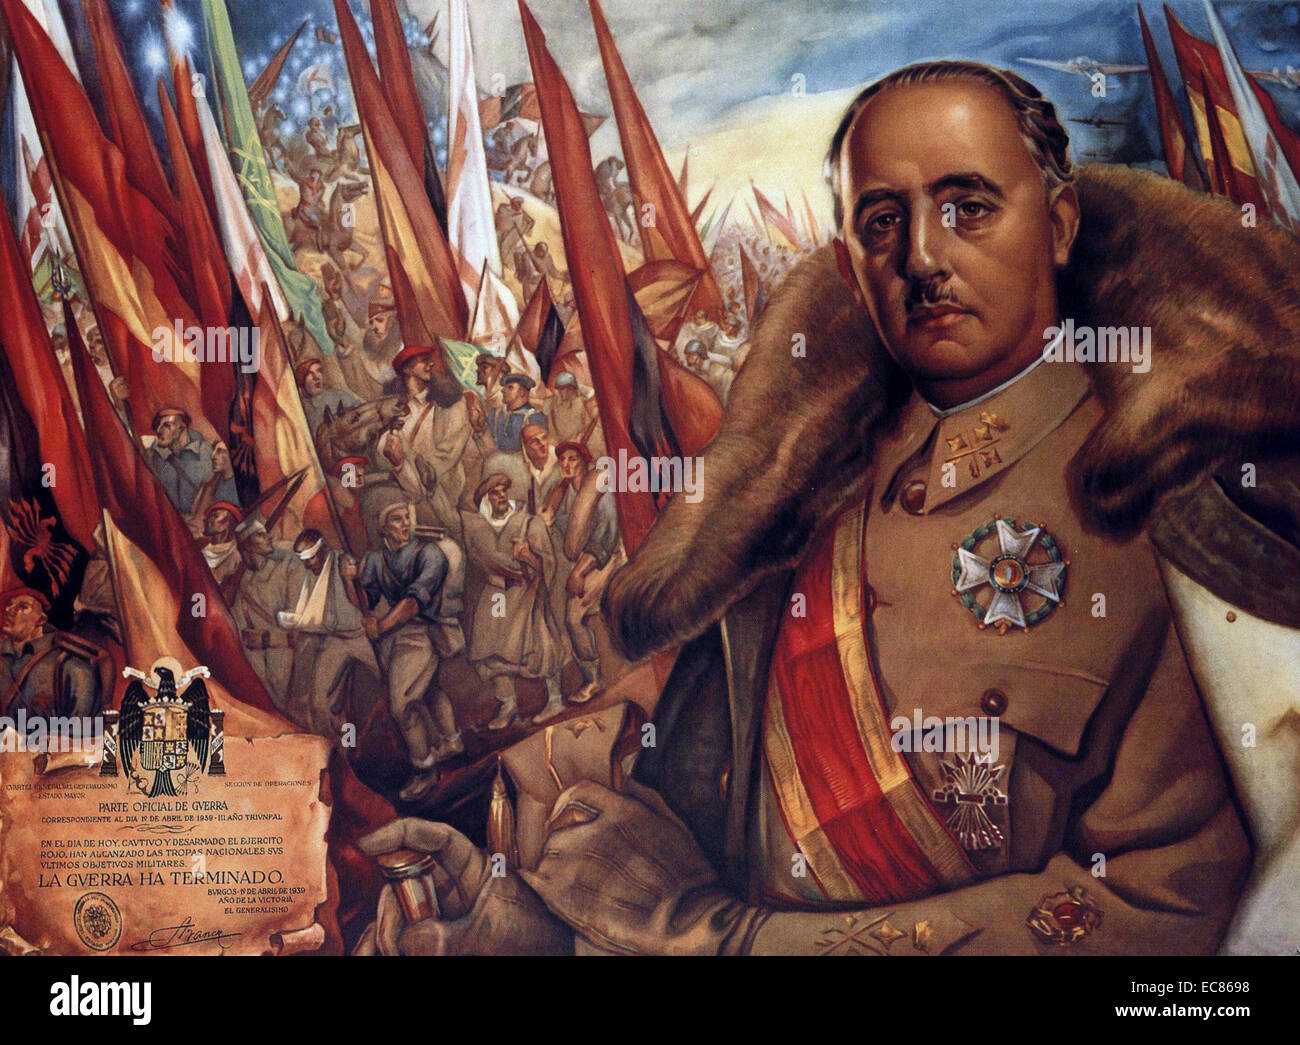 Francisco Franco Bahamonde (1892 – 1975) dictator of Spain from 1939 to his death in 1975 Stock Photo